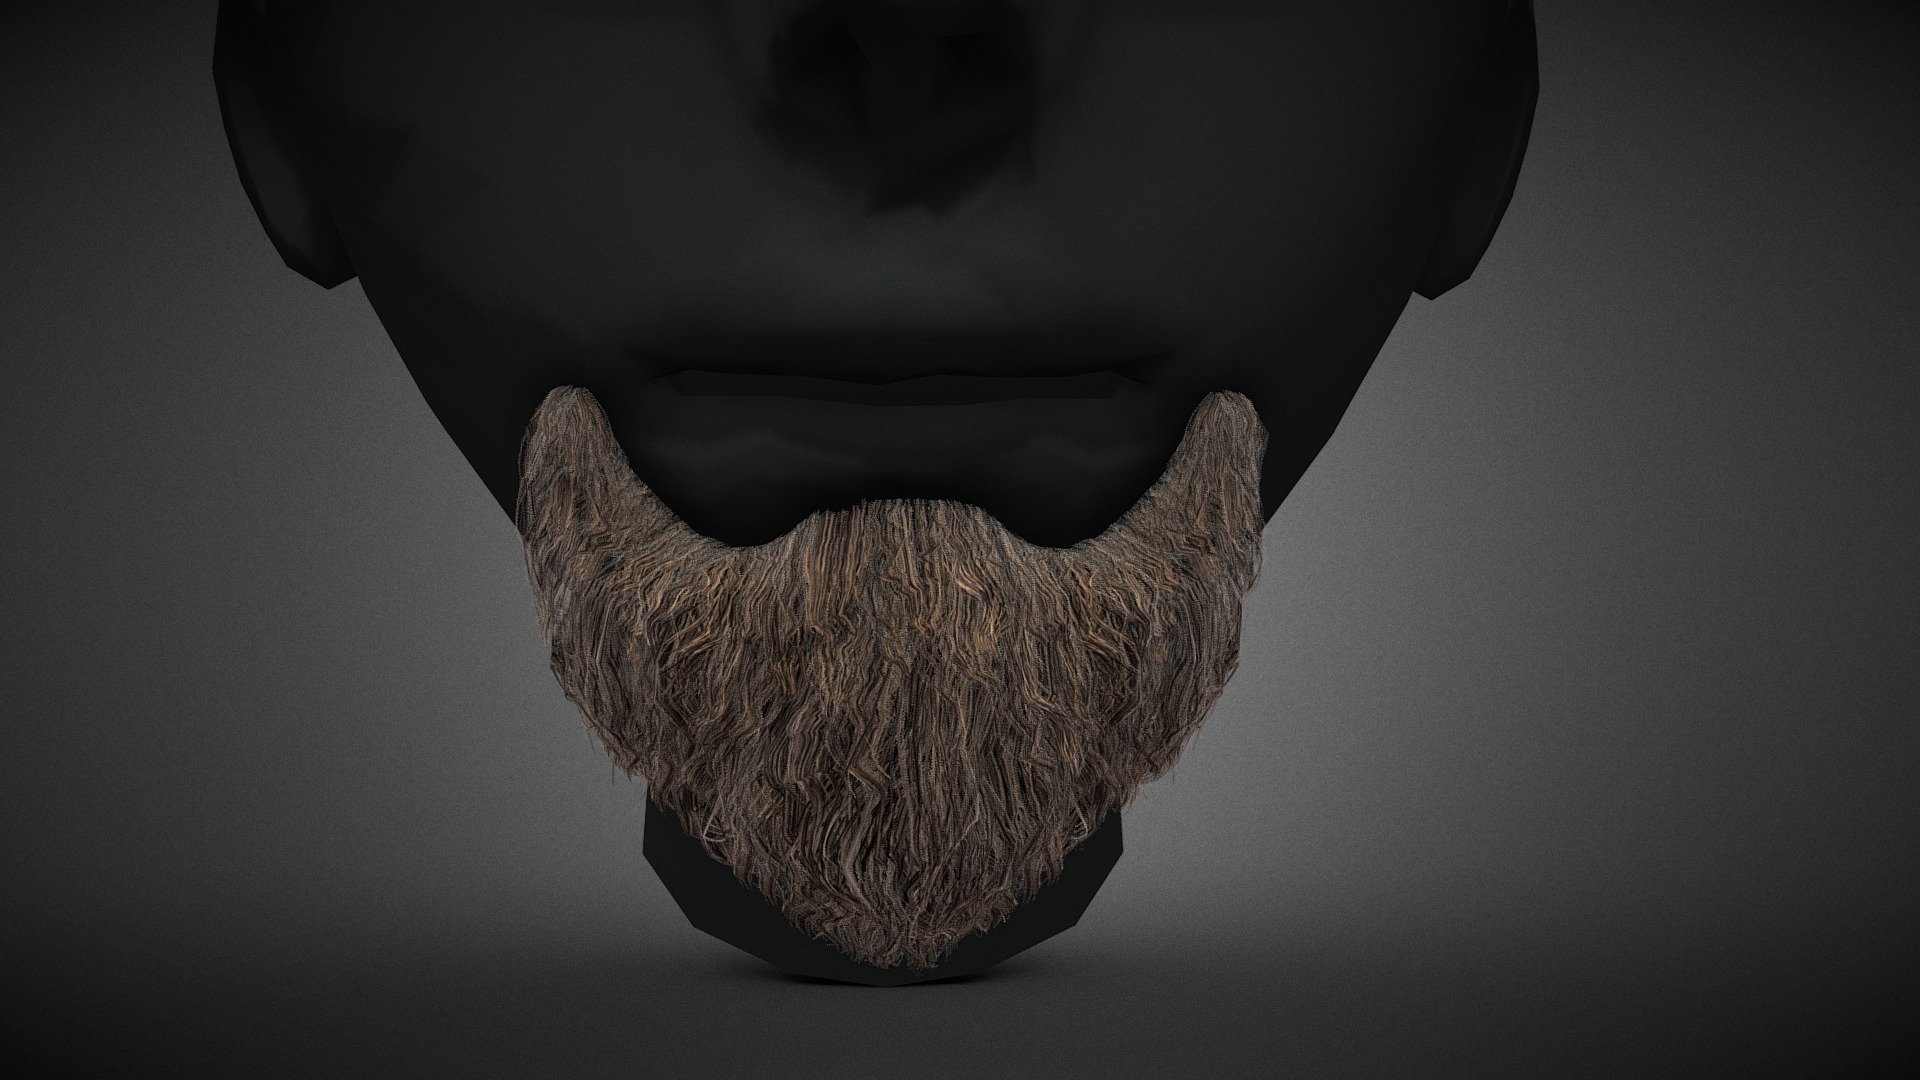 CG StudioX Present :
Facial Hair Cards Style 3 - Goatee Beard lowpoly/PBR




The photo been rendered using Marmoset Toolbag 4 (real time game engine )

The head model is decimated to show how the hair looks on the head.


Features :



Comes with Specular and Metalness PBR 4K texture .

Good topology.

Low polygon geometry.

The Model is prefect for game for both Specular workflow as in Unity and Metalness as in Unreal engine .

The model also rendered using Marmoset Toolbag 4 with both Specular and Metalness PBR and also included in the product with the full texture.

The texture can be easily adjustable .


Texture :



One set of UV for the Hair [Albedo -Normal-Metalness -Roughness-Gloss-Specular-Ao-Alpha-Depth-Direction-ID-Root] (4096*4096).

One set of UV for the Cap [Albedo -Normal-Metalness -Roughness-Gloss-Specular-Alpha] (4096*4096).


Files :
Marmoset Toolbag 4 ,Maya,,FBX,glTF,Blender,OBj with all the textures.




Contact me for if you have any questions.
 - Facial Hair Cards Style 3 - Goatee Beard - Buy Royalty Free 3D model by CG StudioX (@CG_StudioX) 3d model